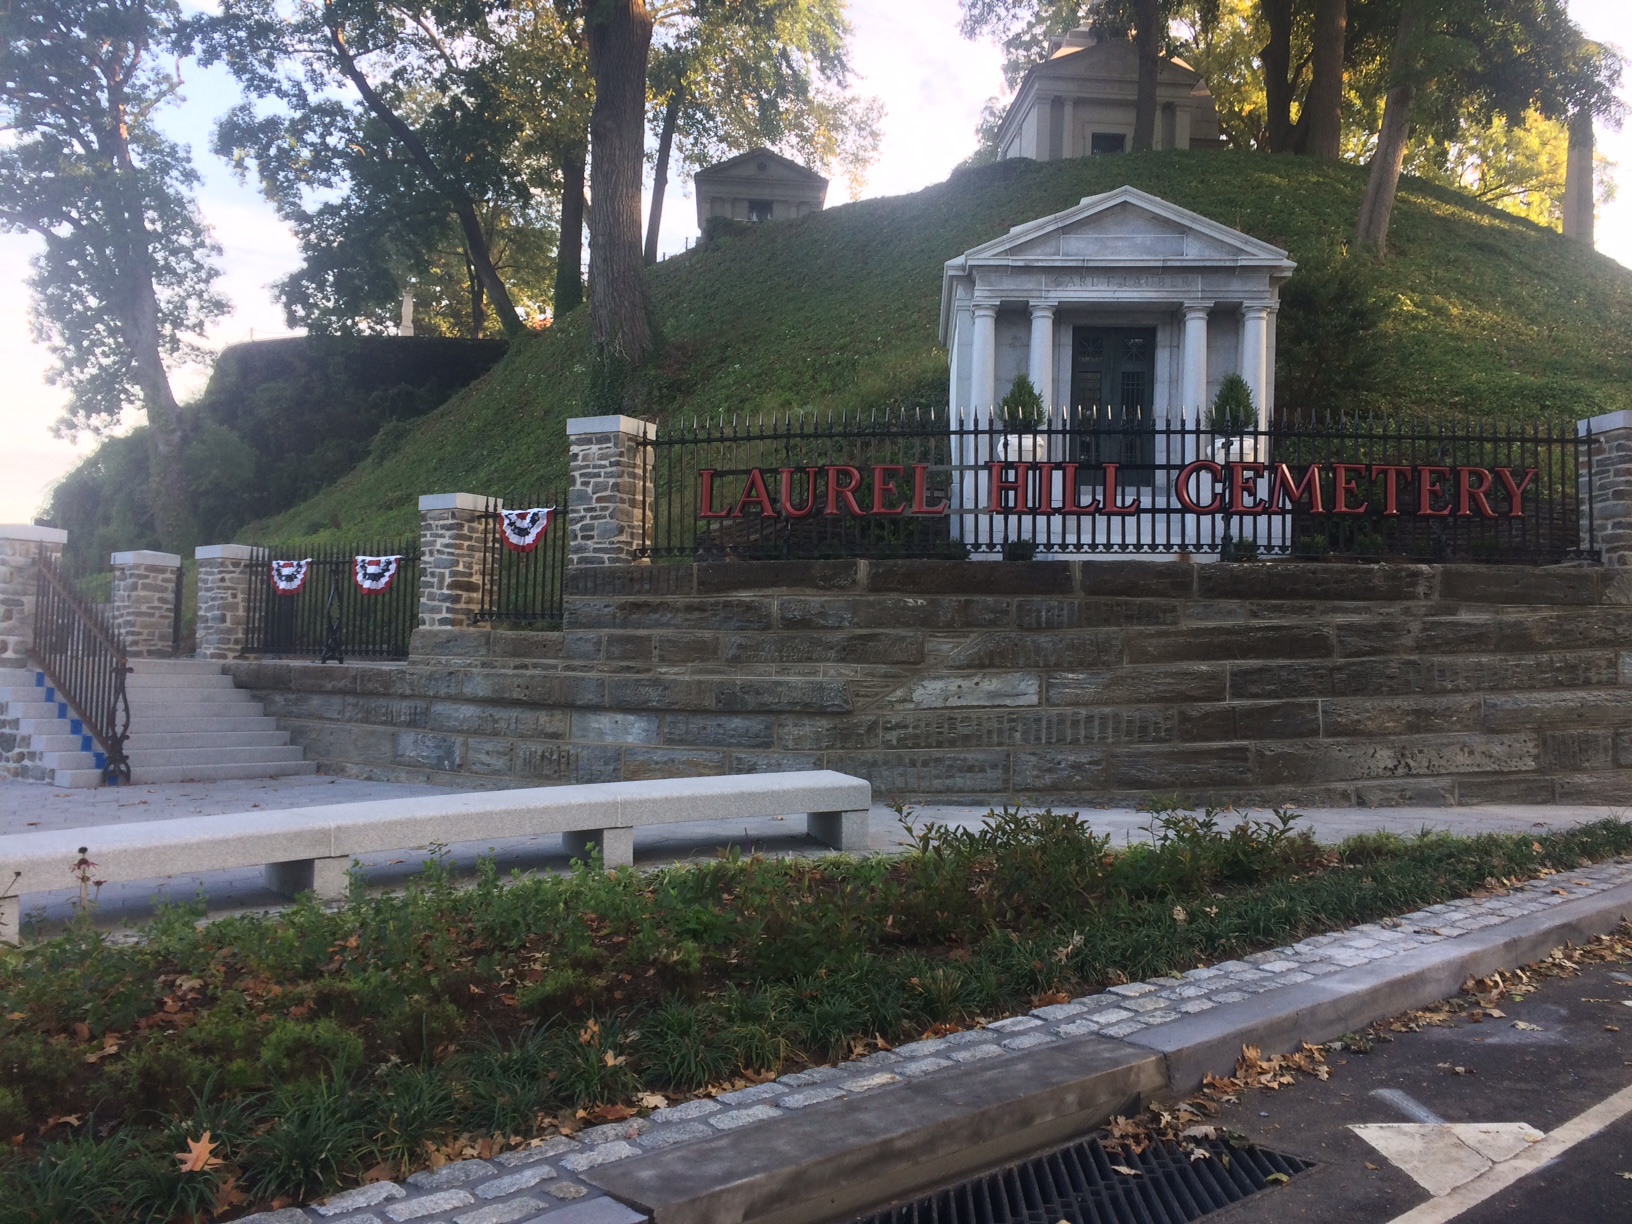 New entrance, landscaping and bench at Laurel Hill Cemetery